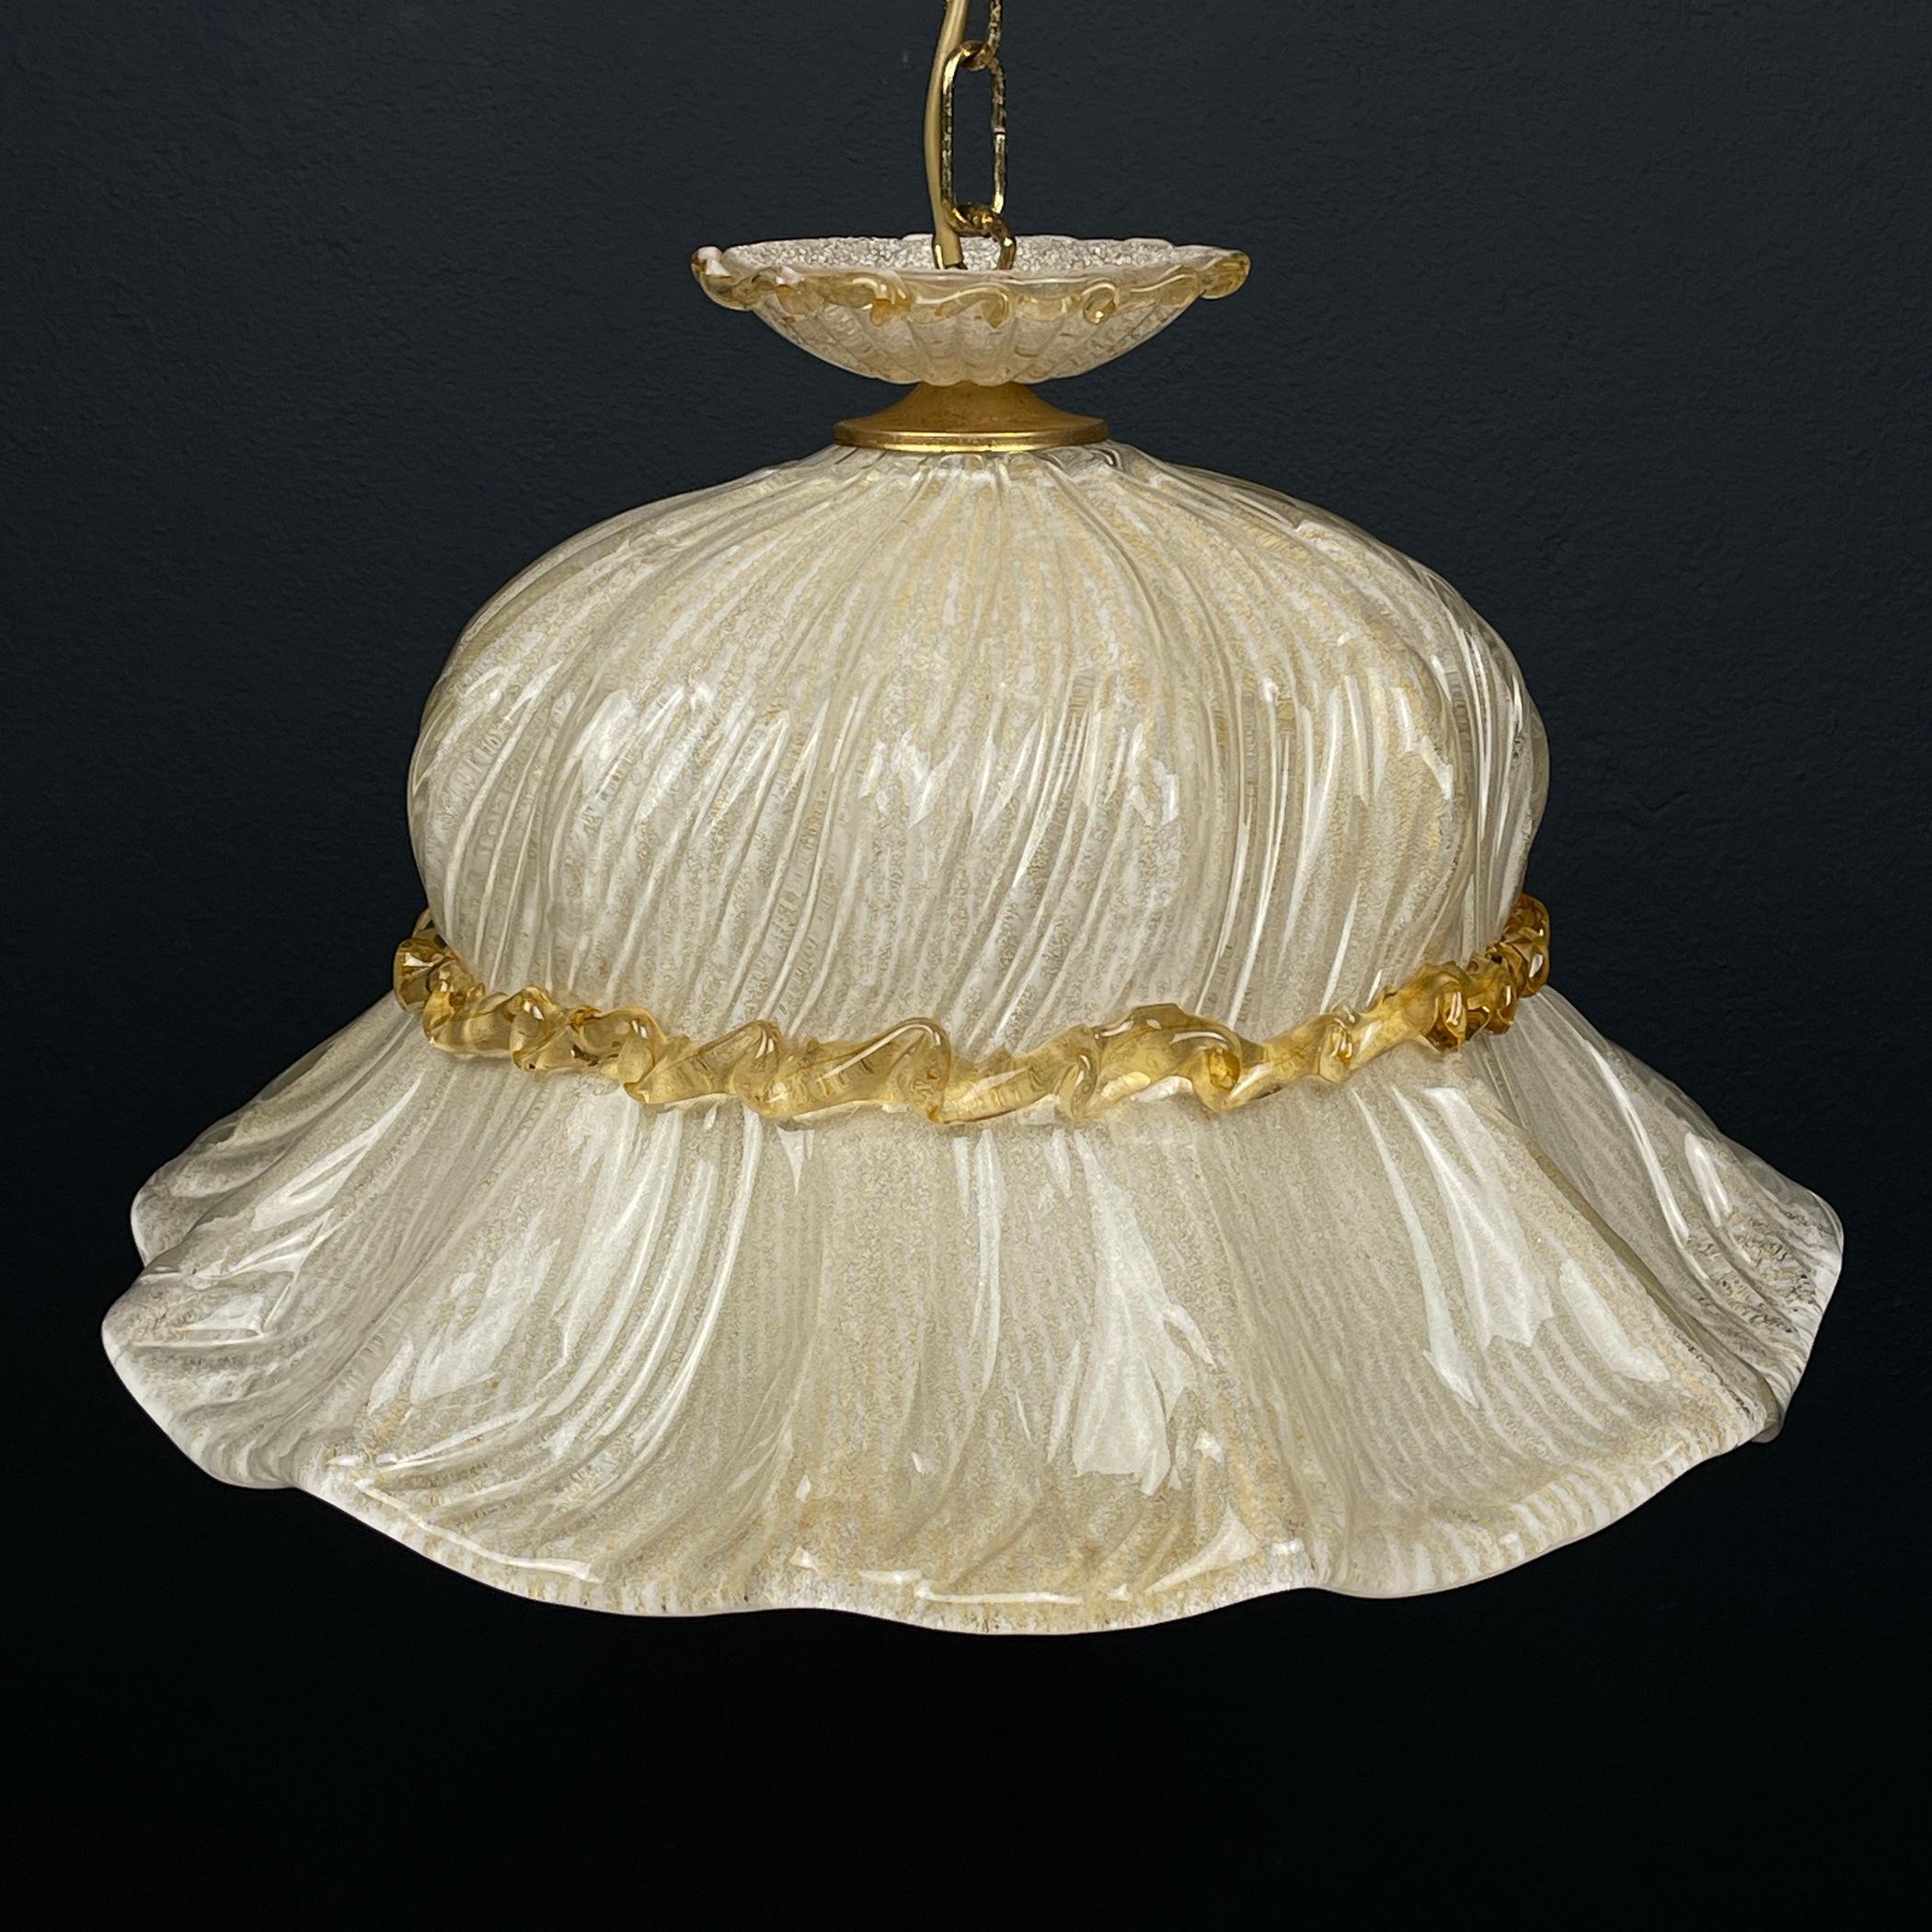 Introducing the exquisite Murano glass chandelier 